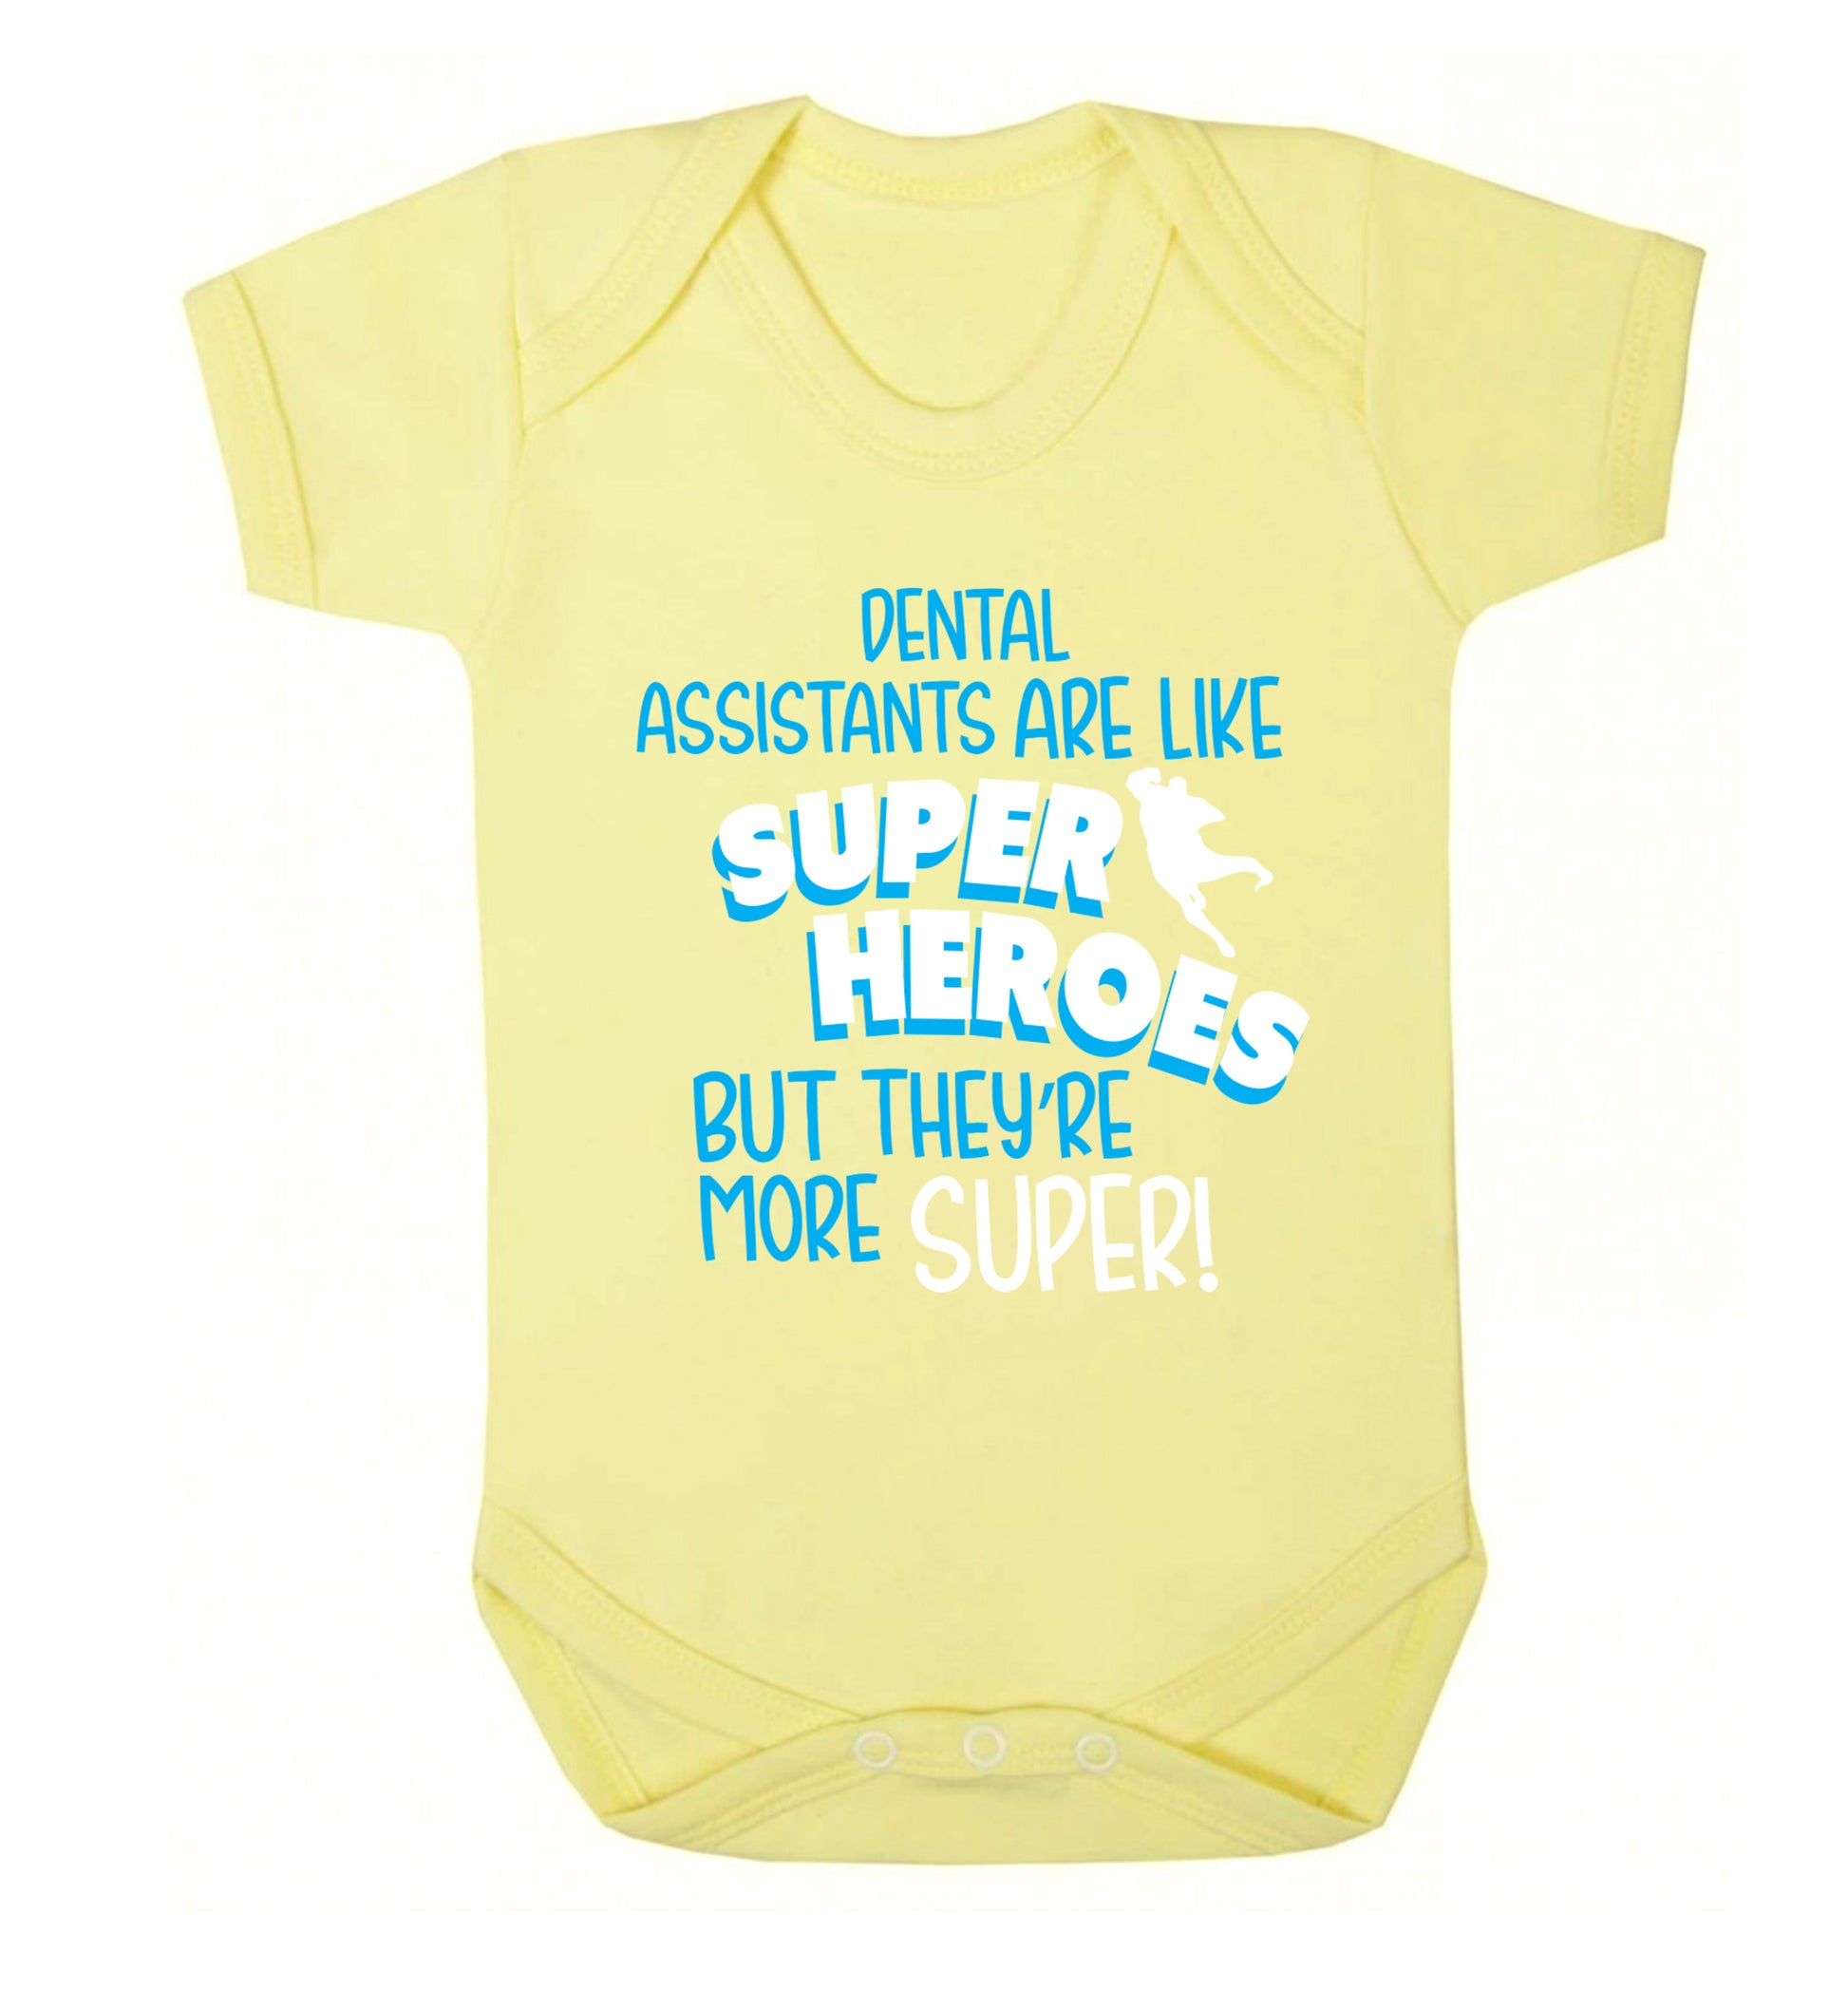 Dental Assistants are like superheros but they're more super Baby Vest pale yellow 18-24 months